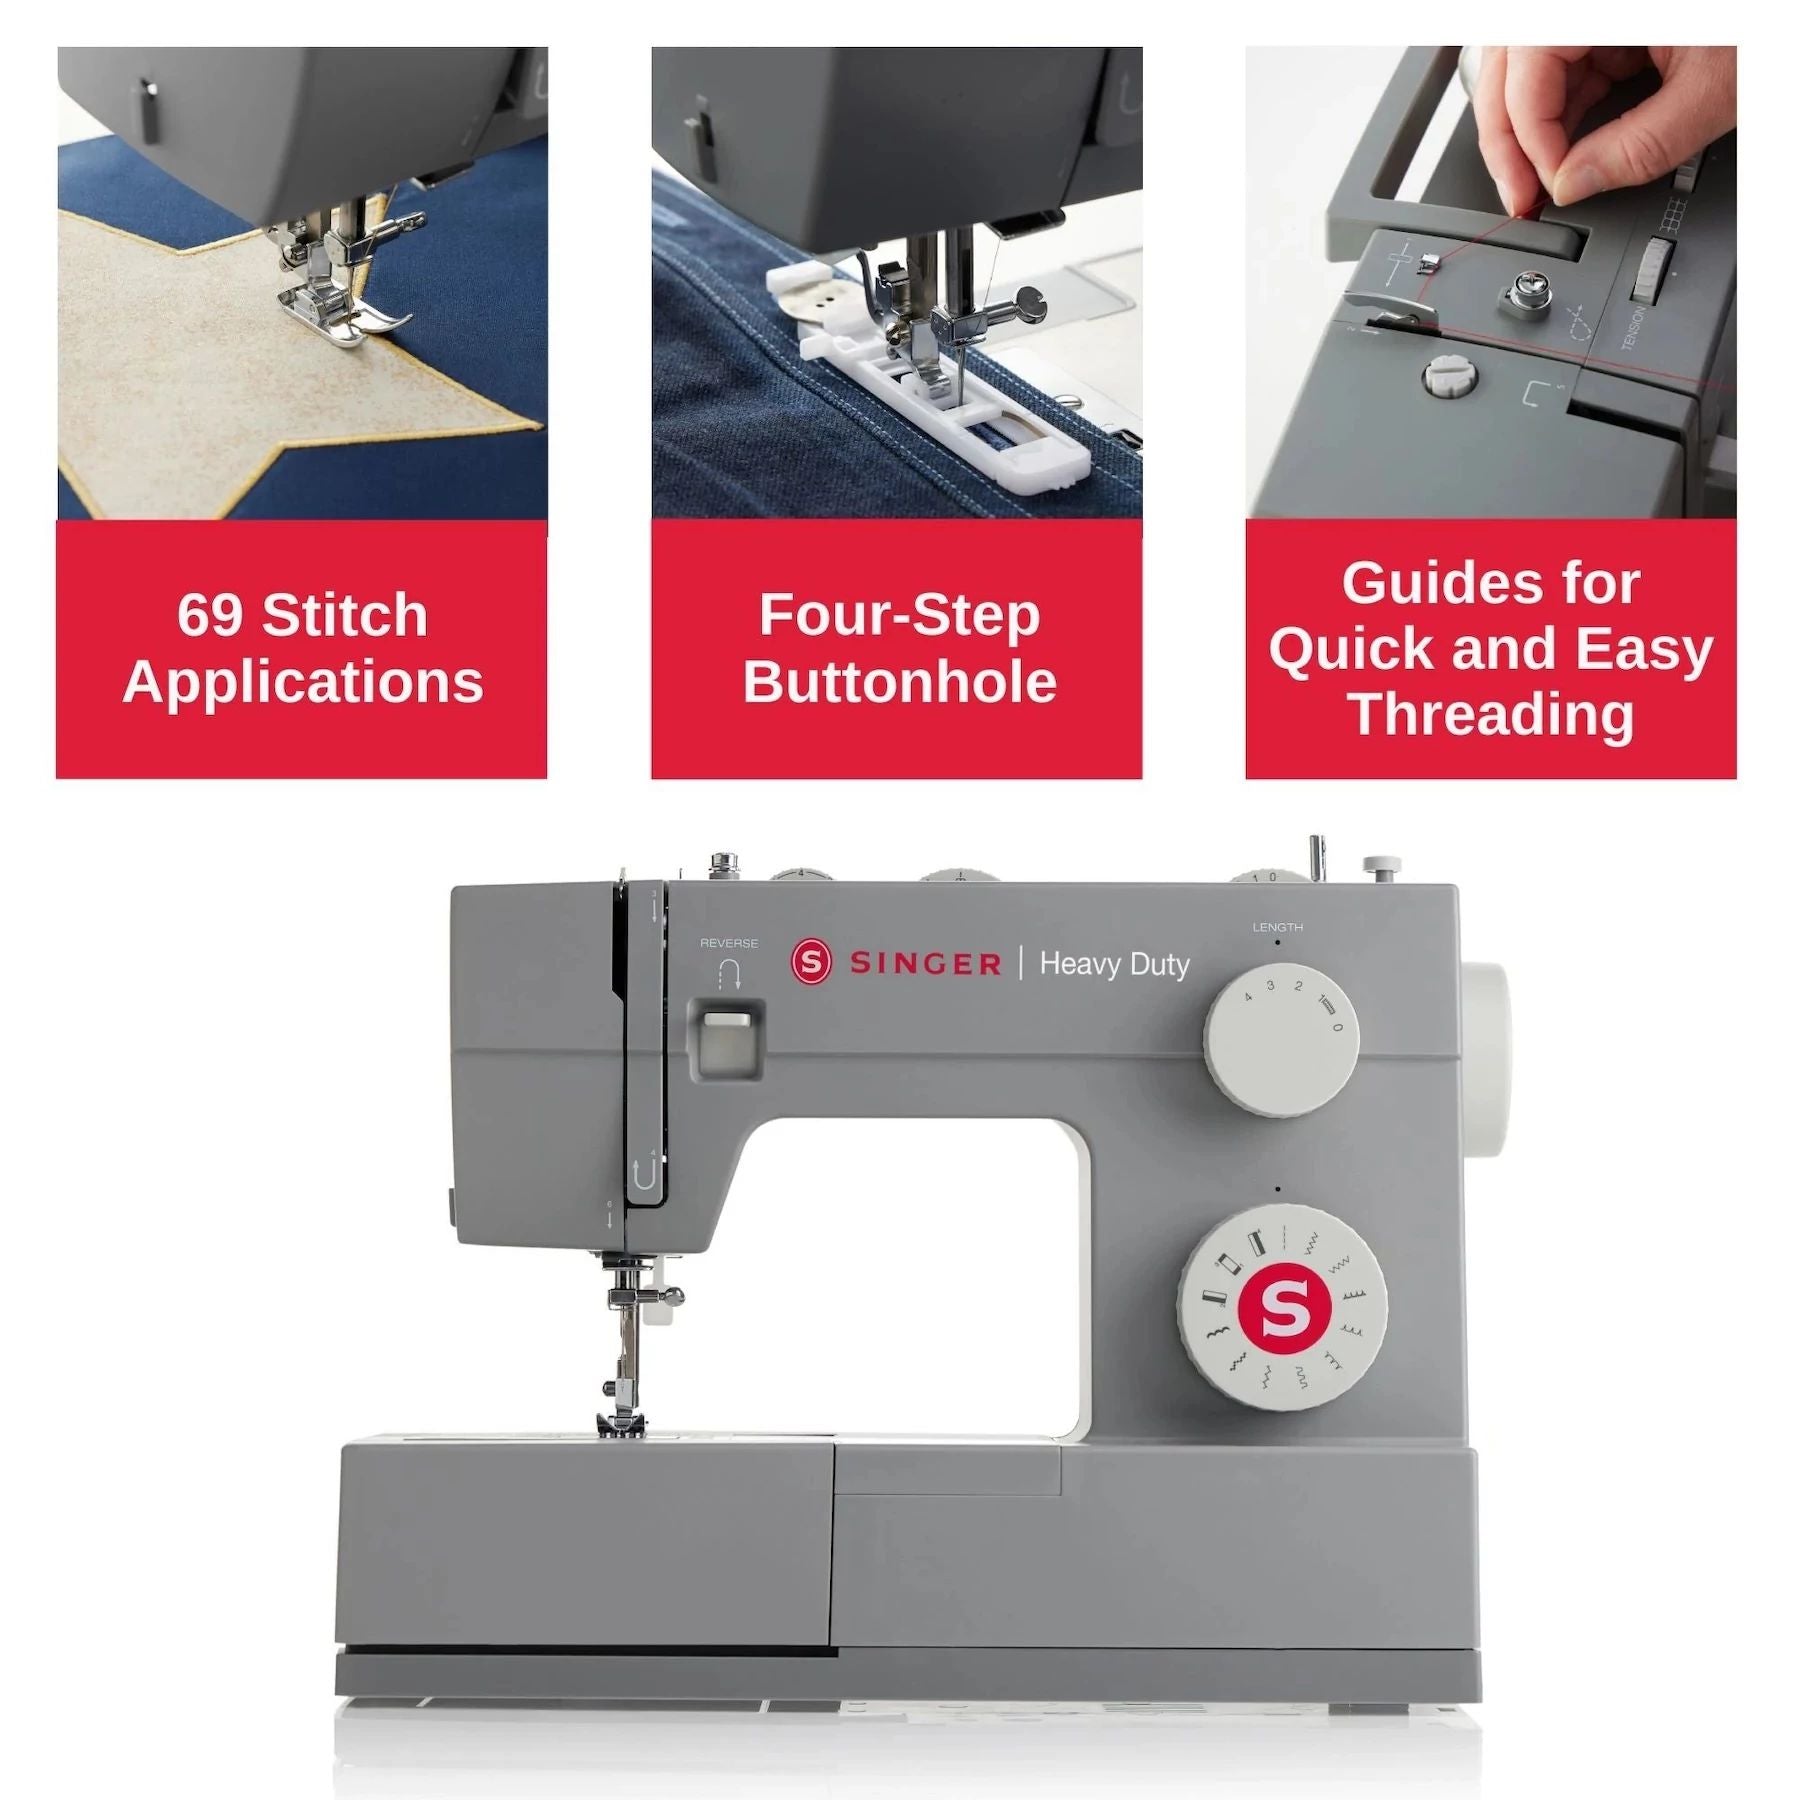 Singer Heavy Duty 4411 sewing machine with feature callouts on top of the image.